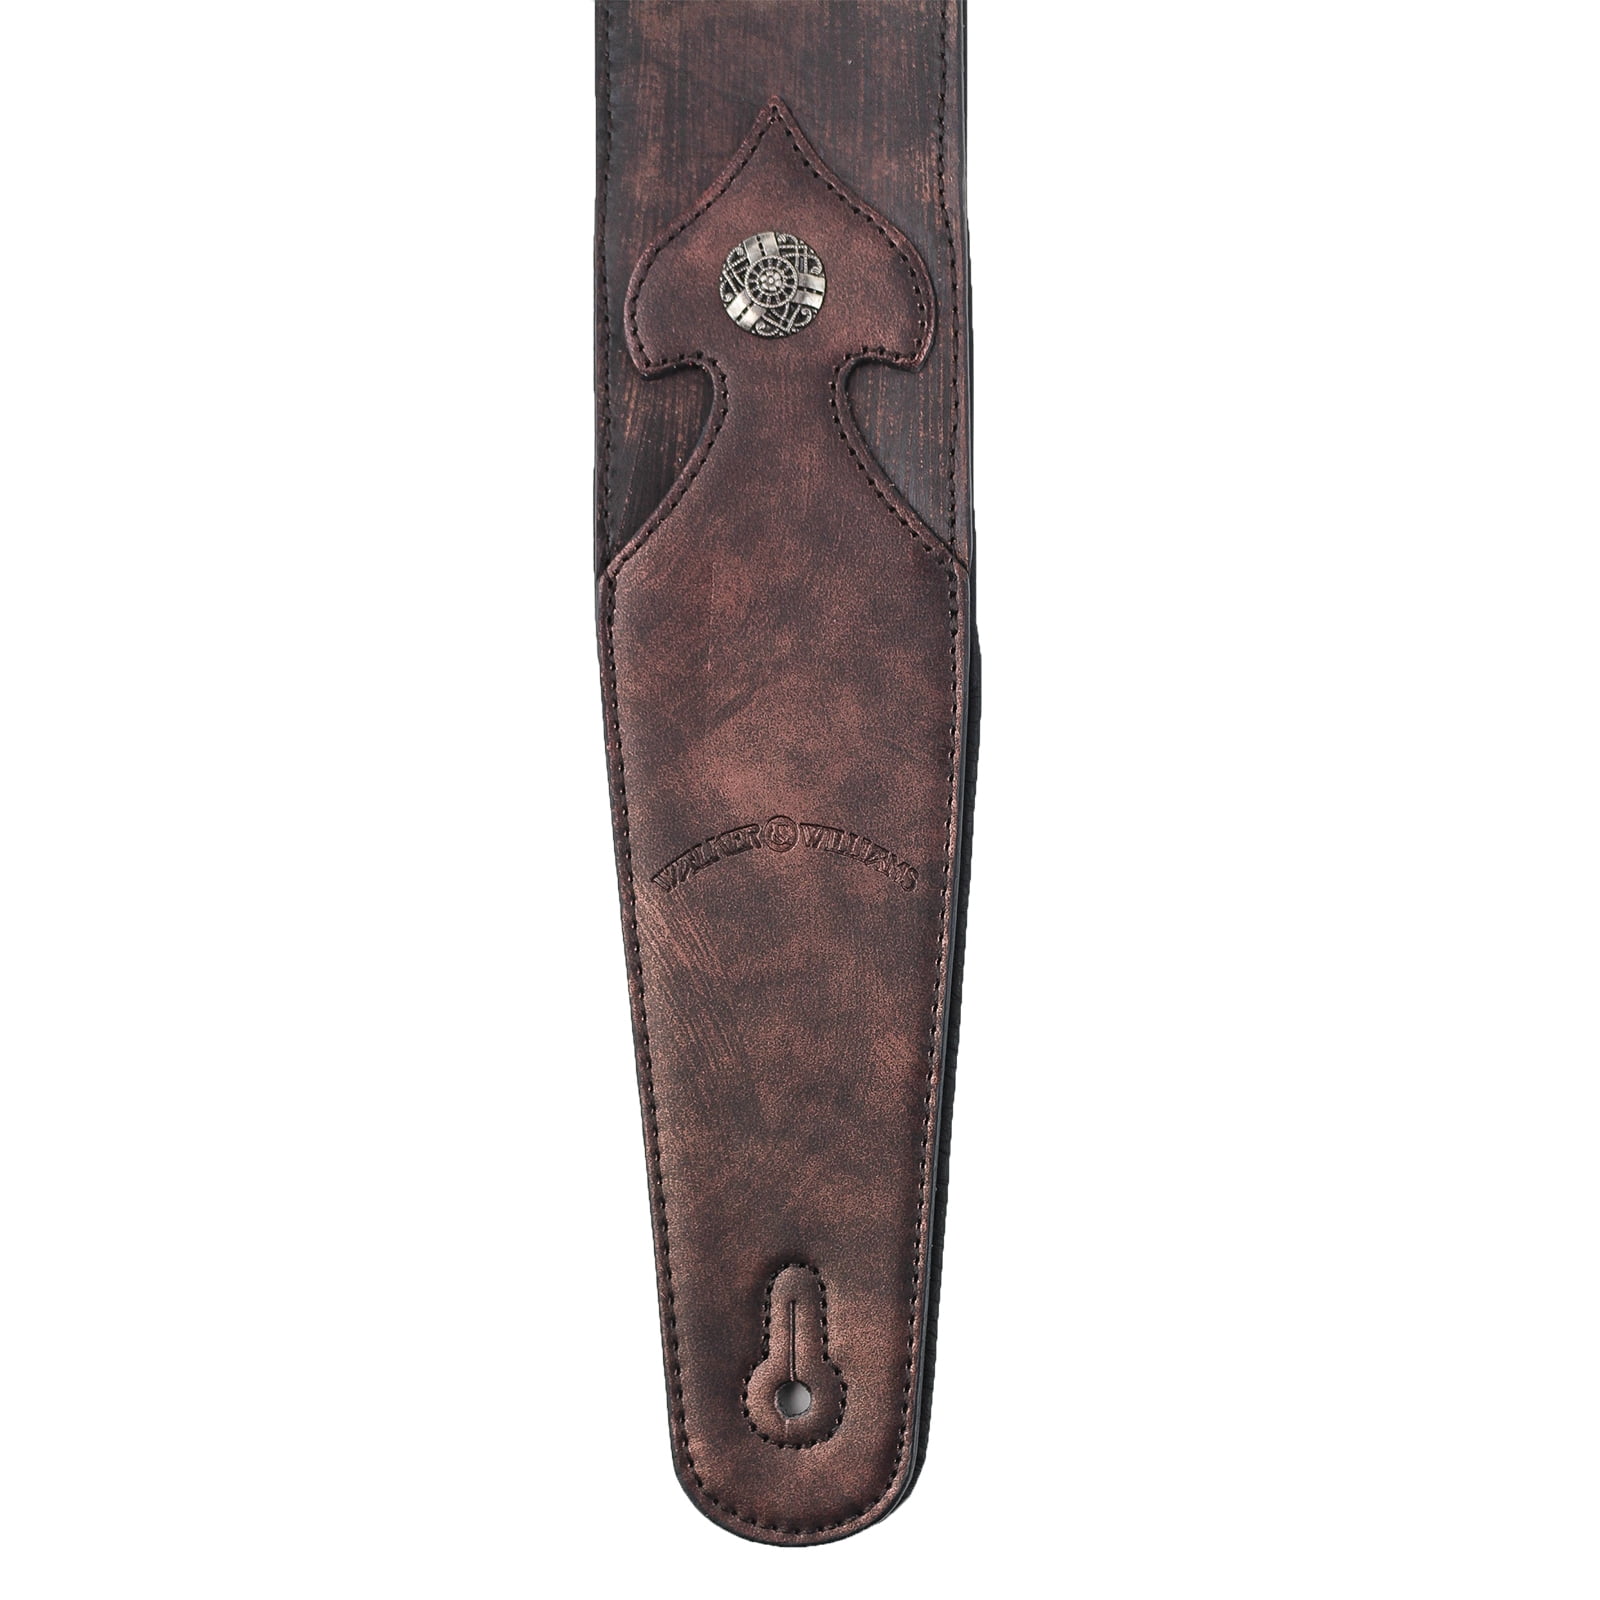 Walker & Williams LIP-05 Metallic Copper Leather Strap with Cross and Thorns Tooling